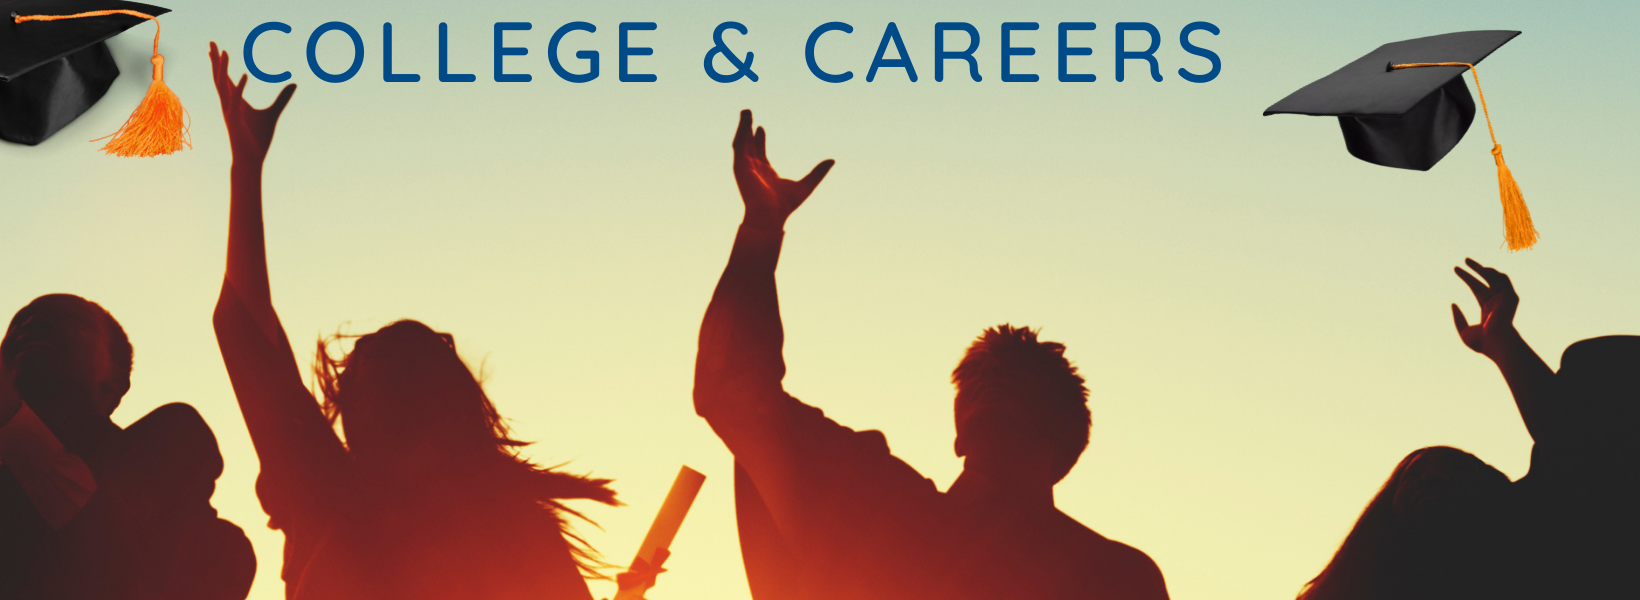 College and Careers website banner (1)